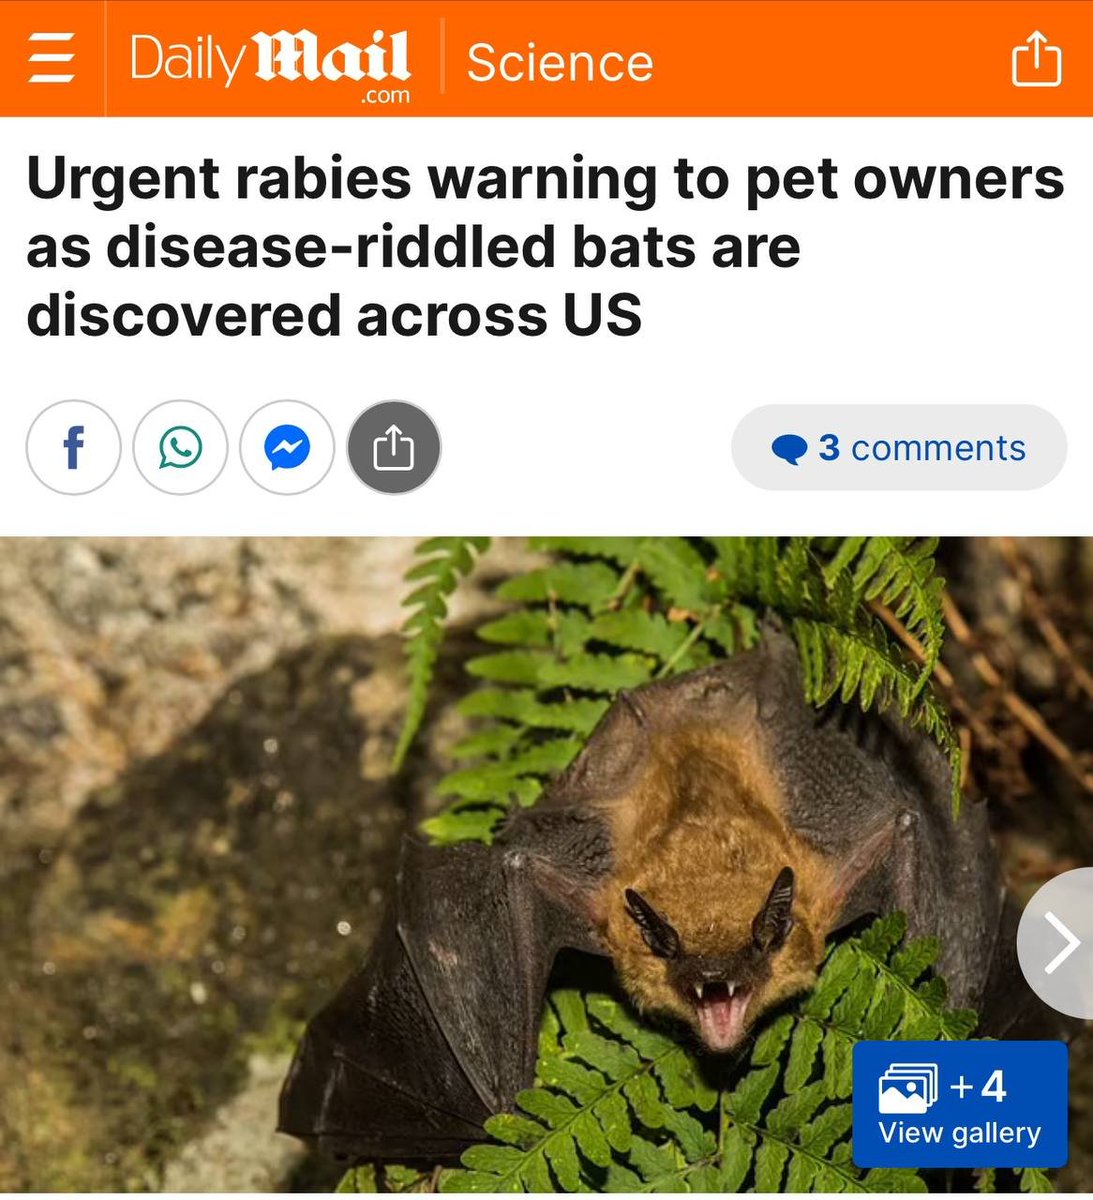 Rabies outbreak in US: Disease-infected bats found? Interesting timing I feel as many pet owners, including myself have stopped complying with these shots. Is there something else going on here caused by 'something' and they are preparing for a fear campaign? While were at it,